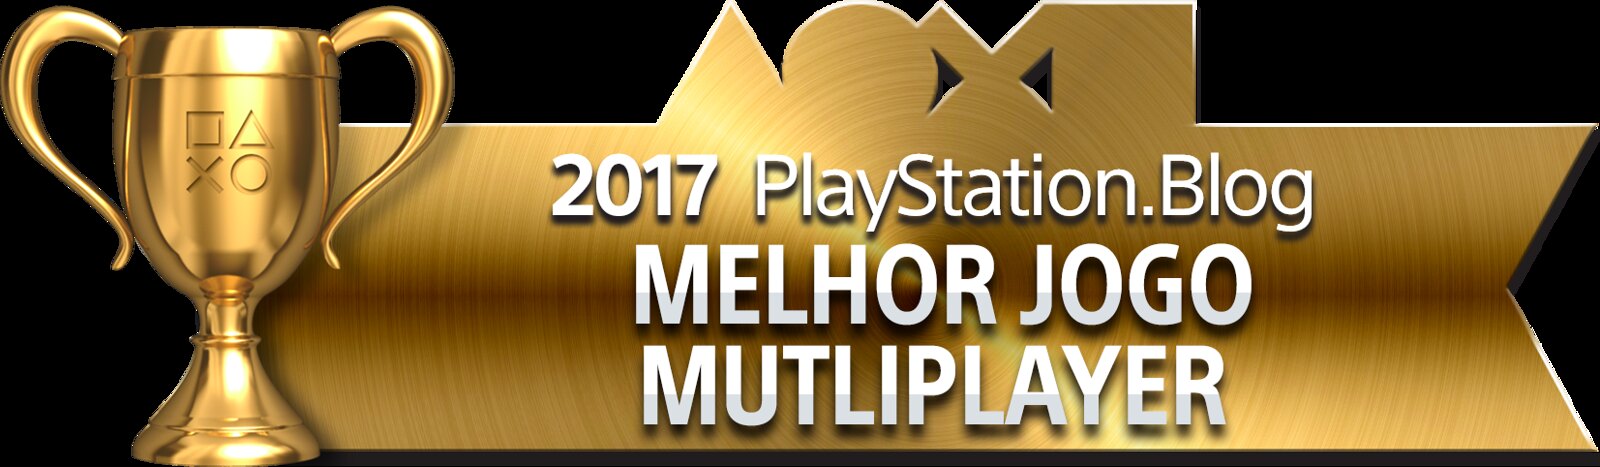 PlayStation Blog Game of the Year 2017 - Best Multiplayer (Gold)